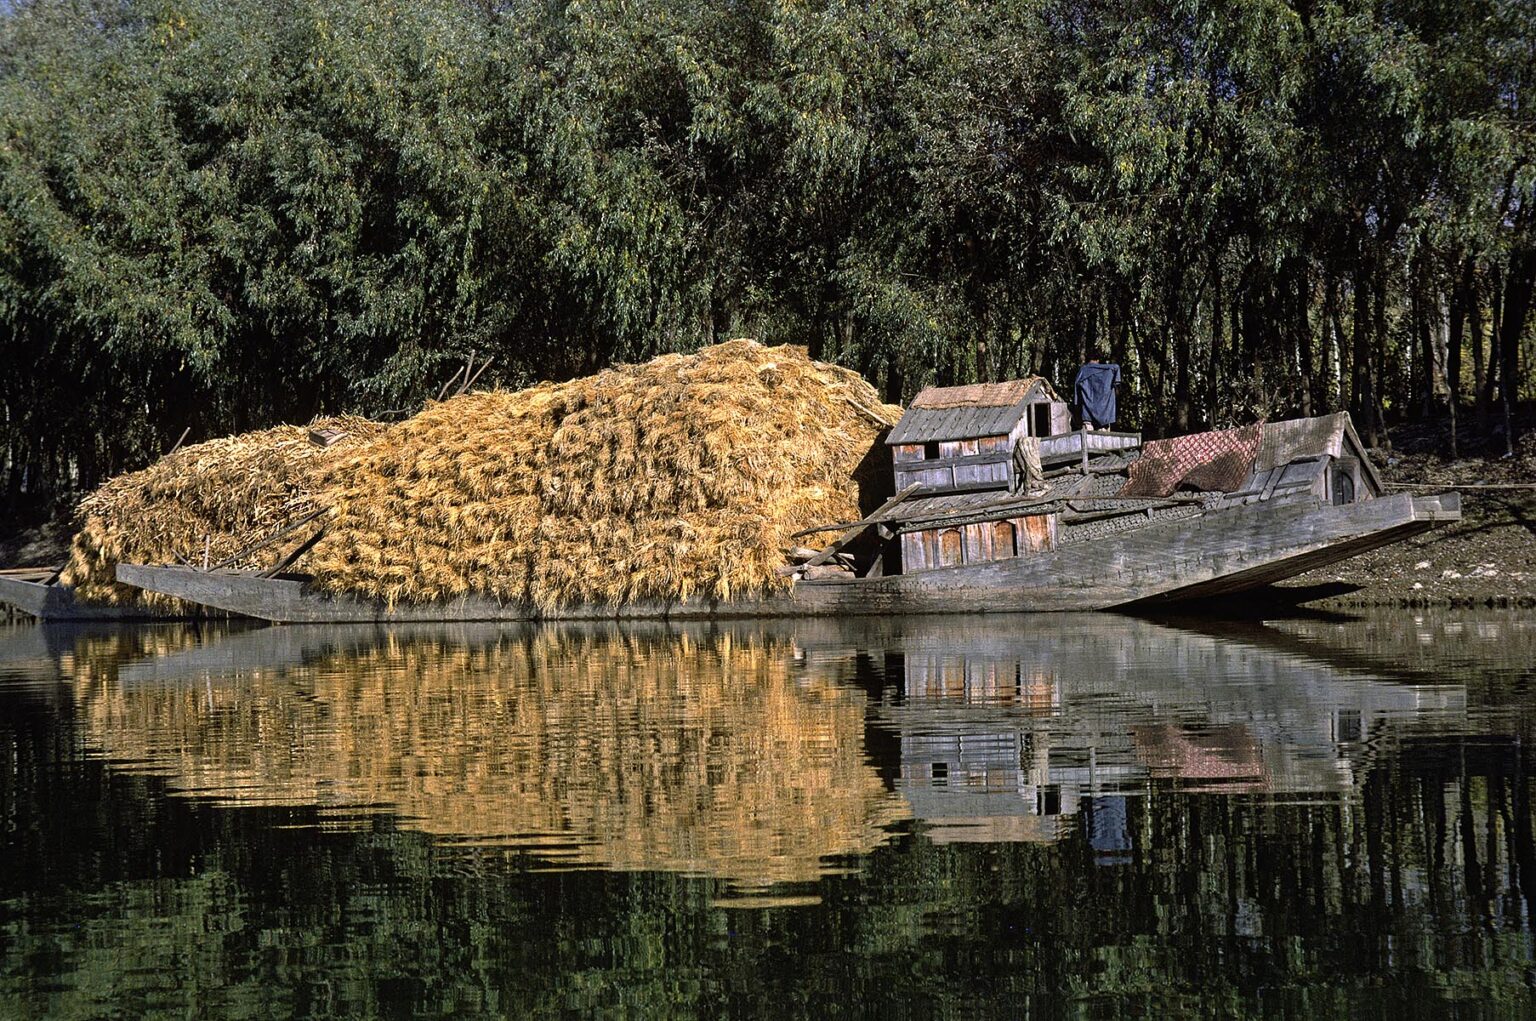 Wooden BARGE carries a load of CORN up the JHELUM RIVER - KASHMIR, INDIA